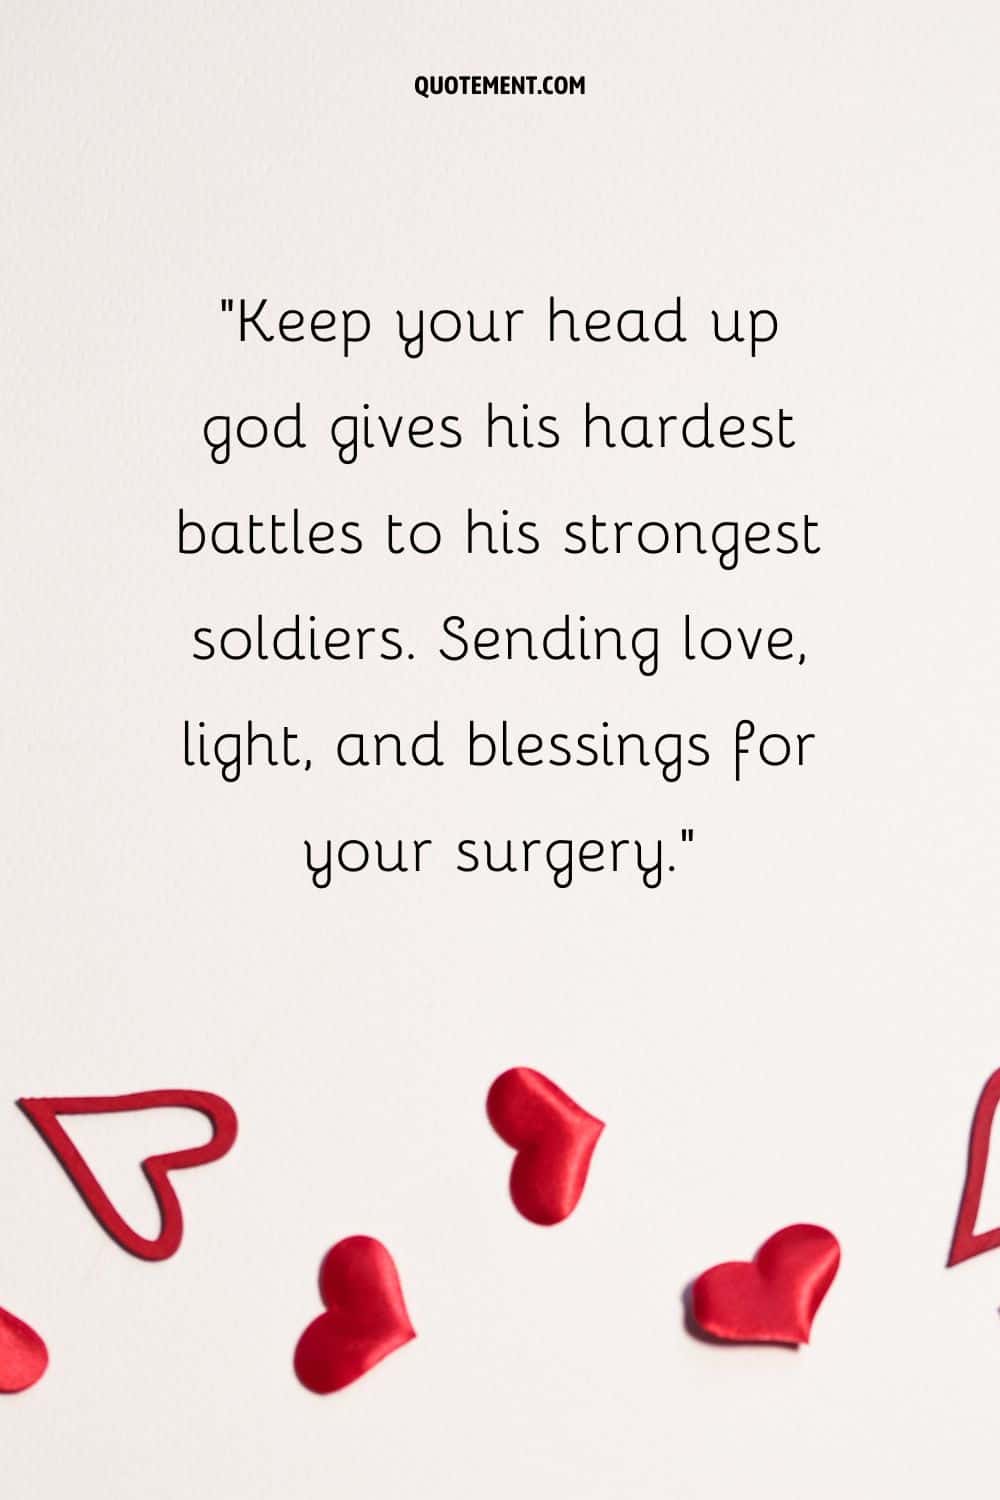 read hearts on a white background representing top before surgery wish and prayer
